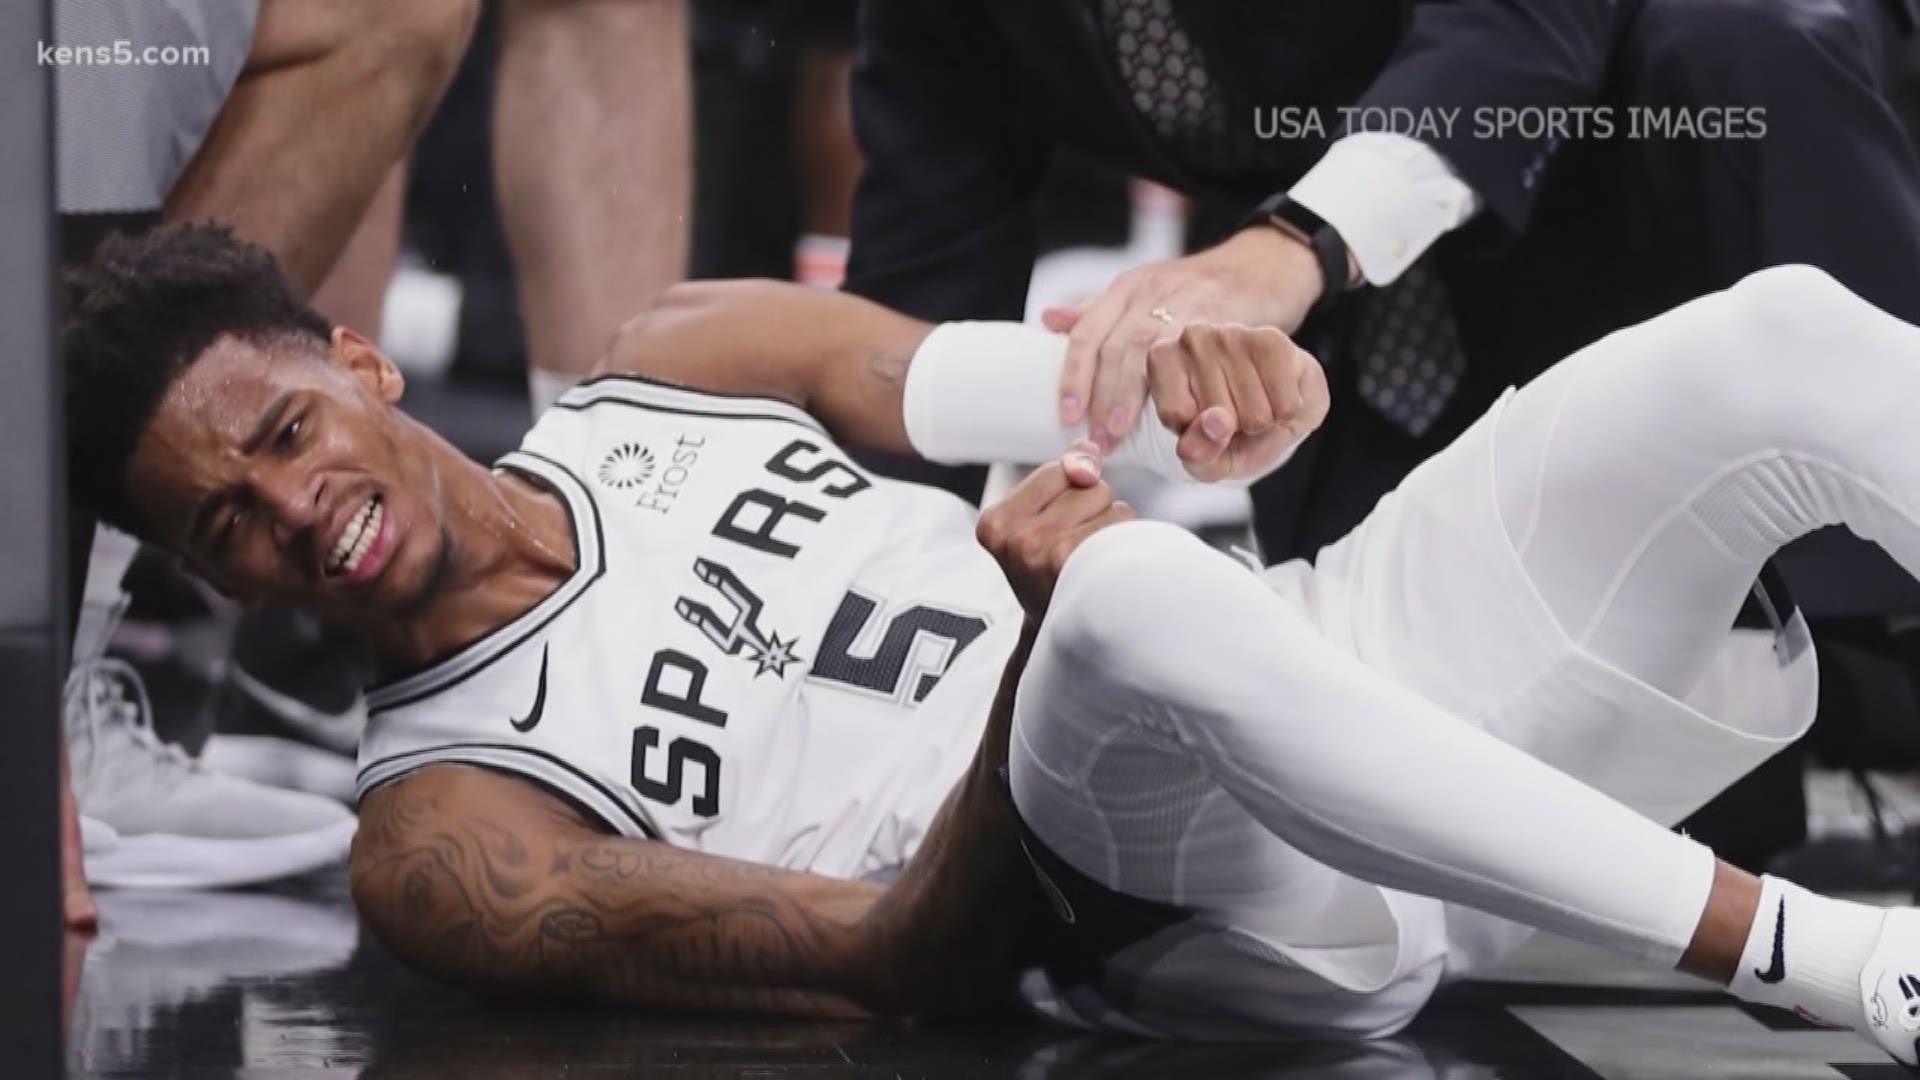 Point guard Dejounte Murray suffered a serious injury in a preseason game and may miss the entire 2018-19 season. Sport Director Joe Reinagel explains.